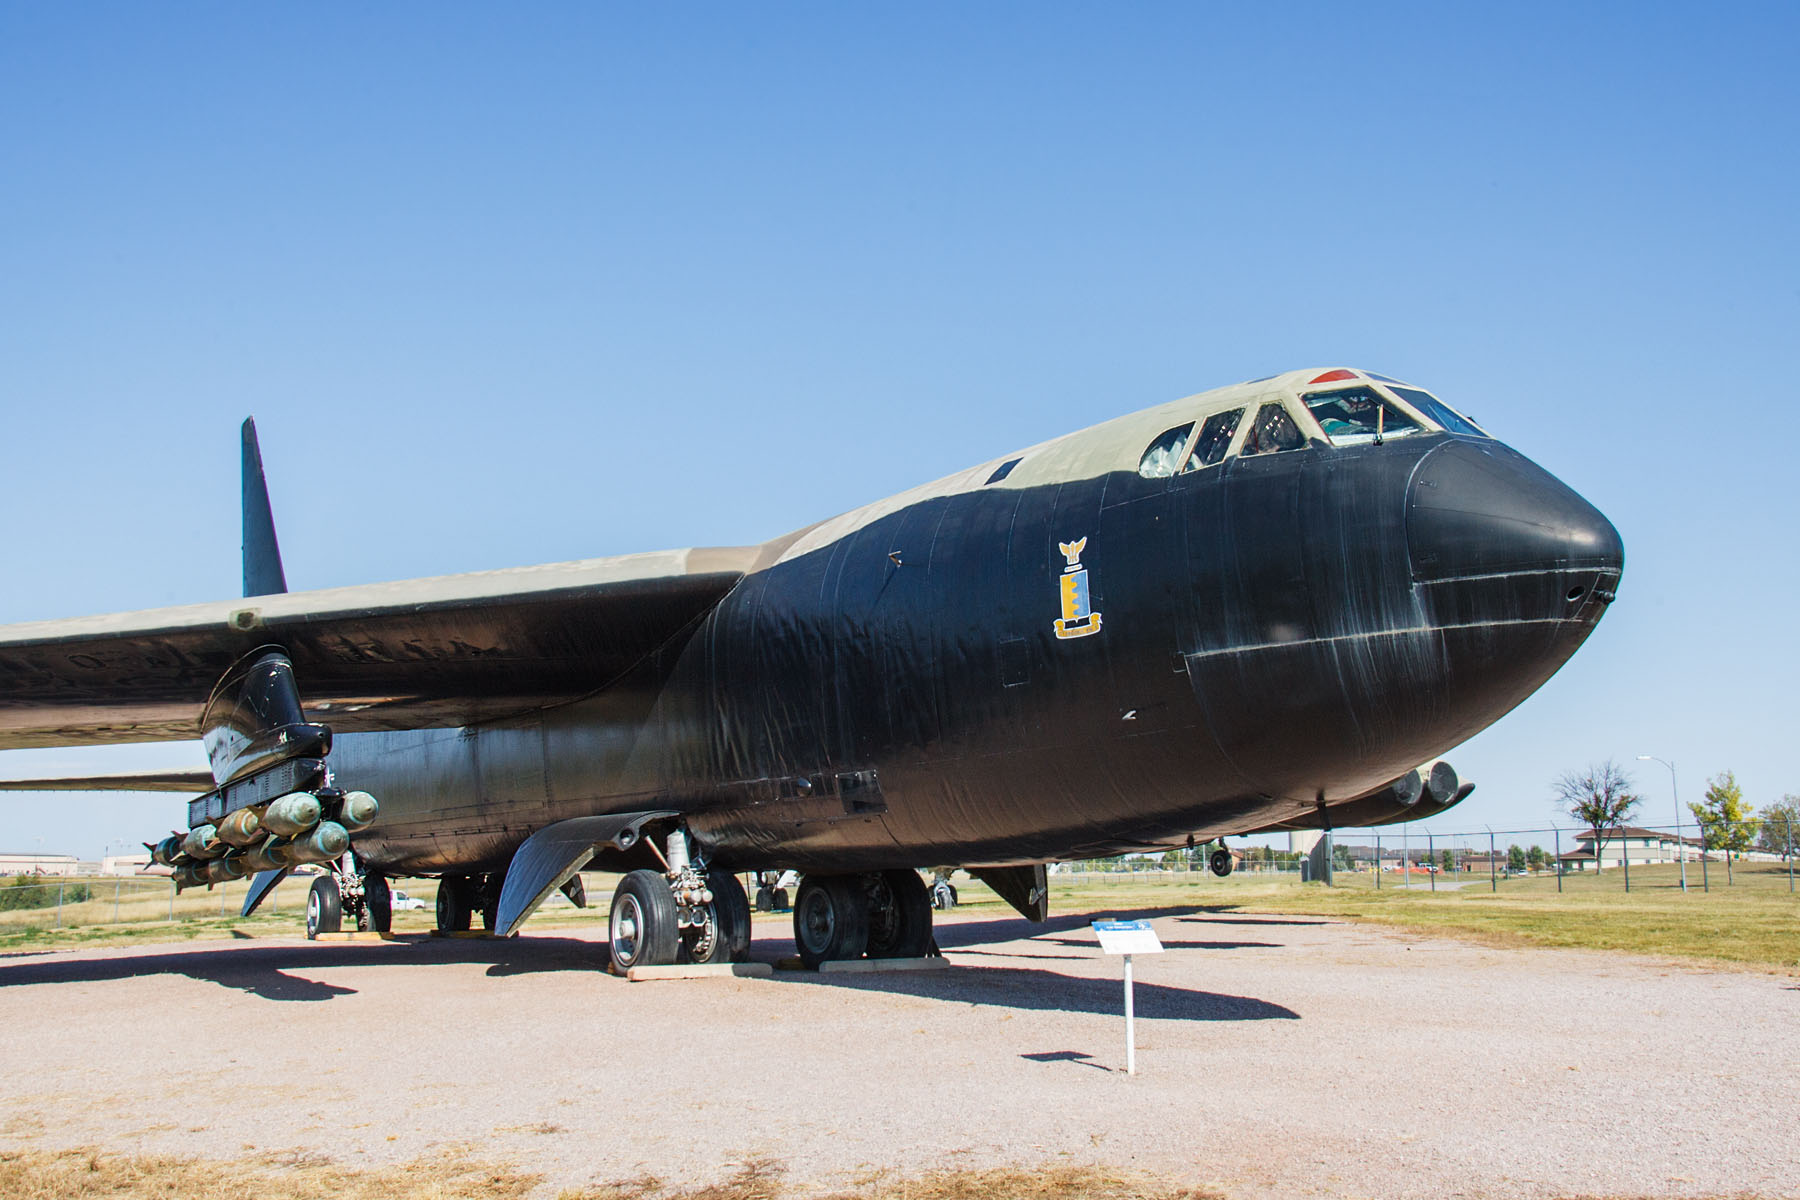 B52 Stratofortress bomber, Ellsworth Air Force Base, SD.  Click for next photo.